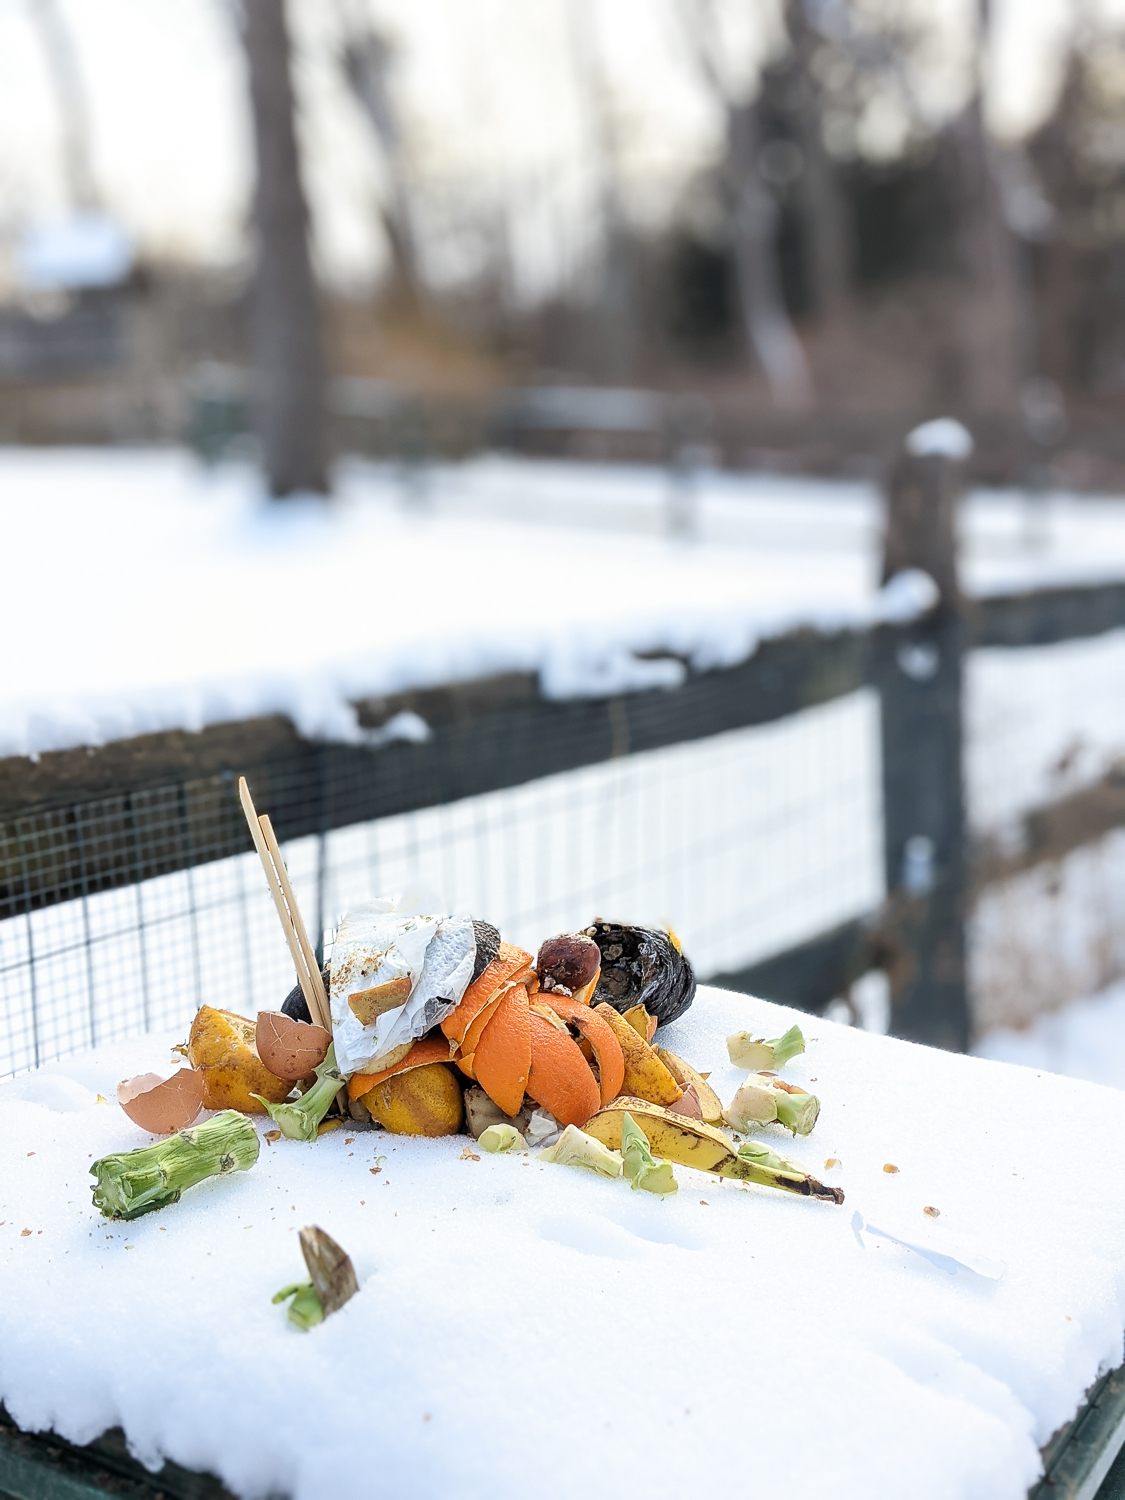 Can I Compost In Winter?